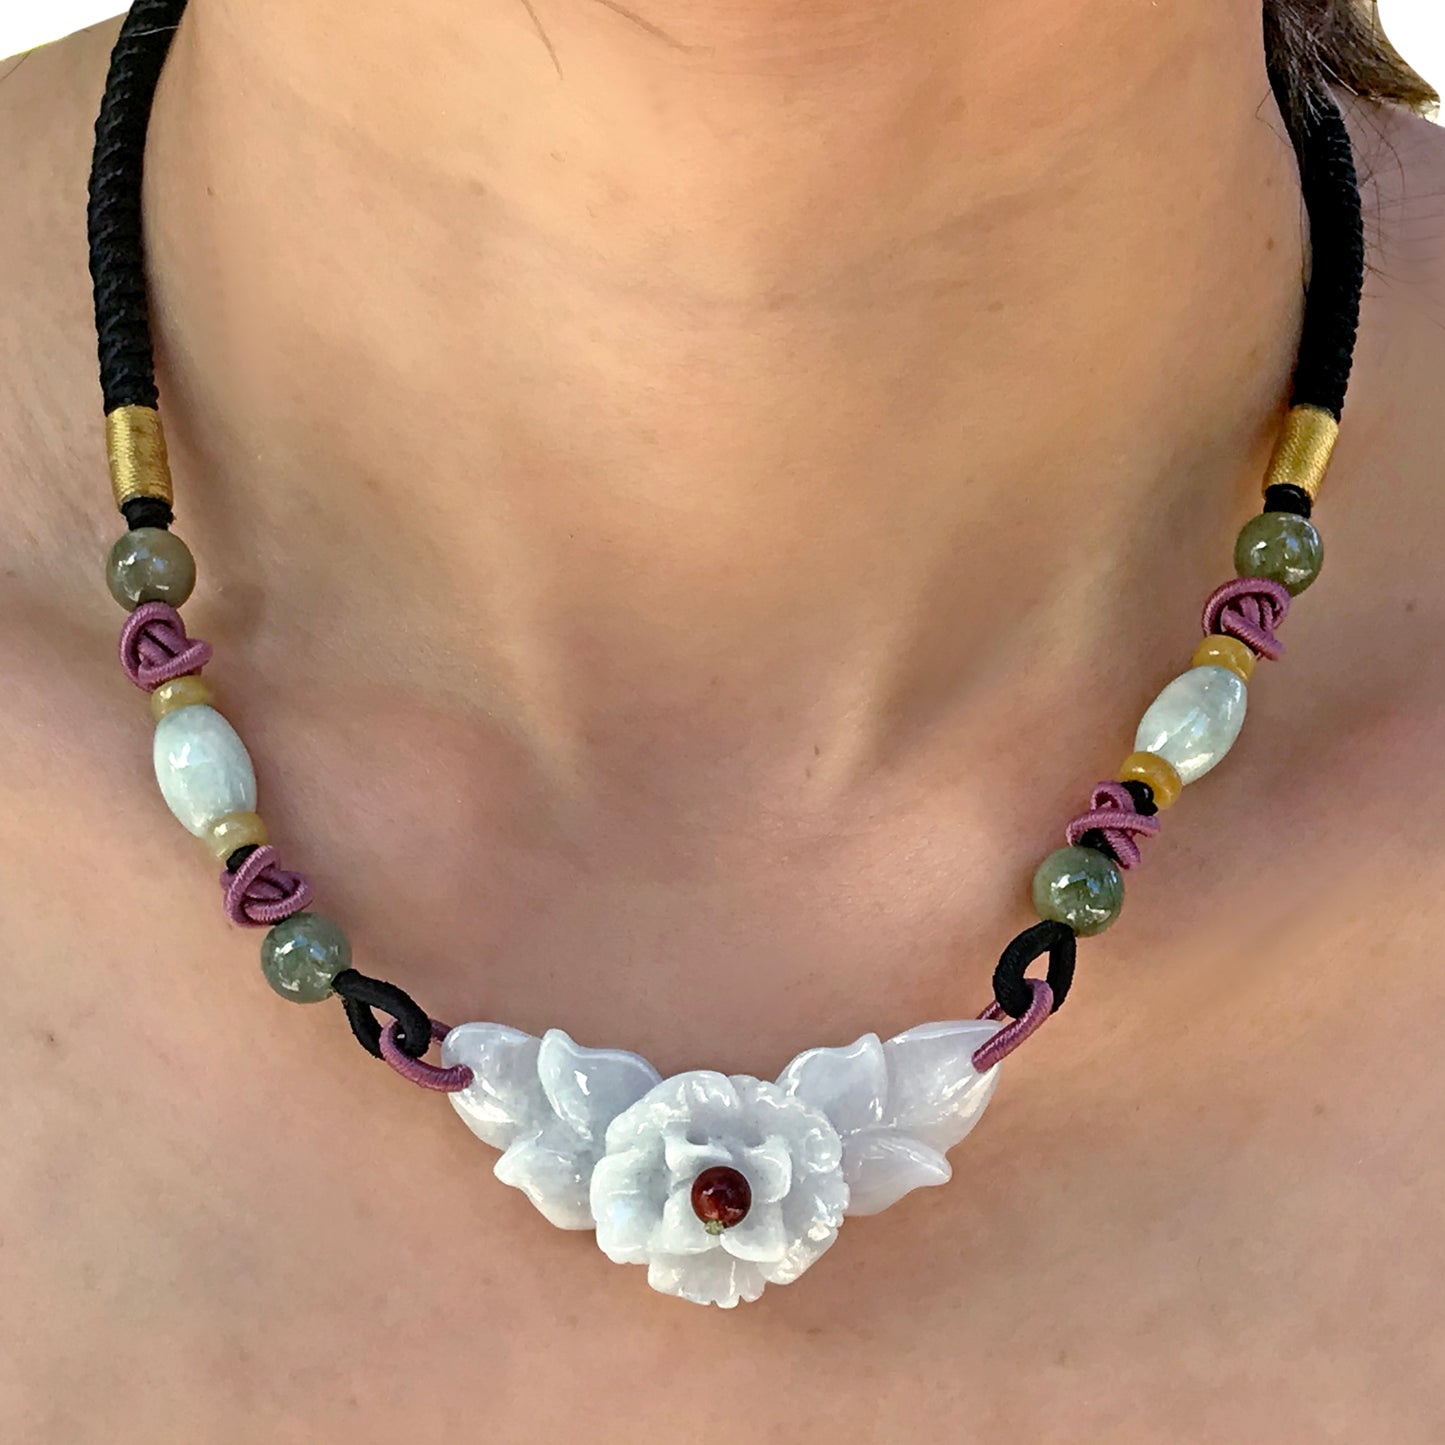 Discover Your True Beauty with a Fortune Flower Handmade Jade Necklace made with Brown Cord